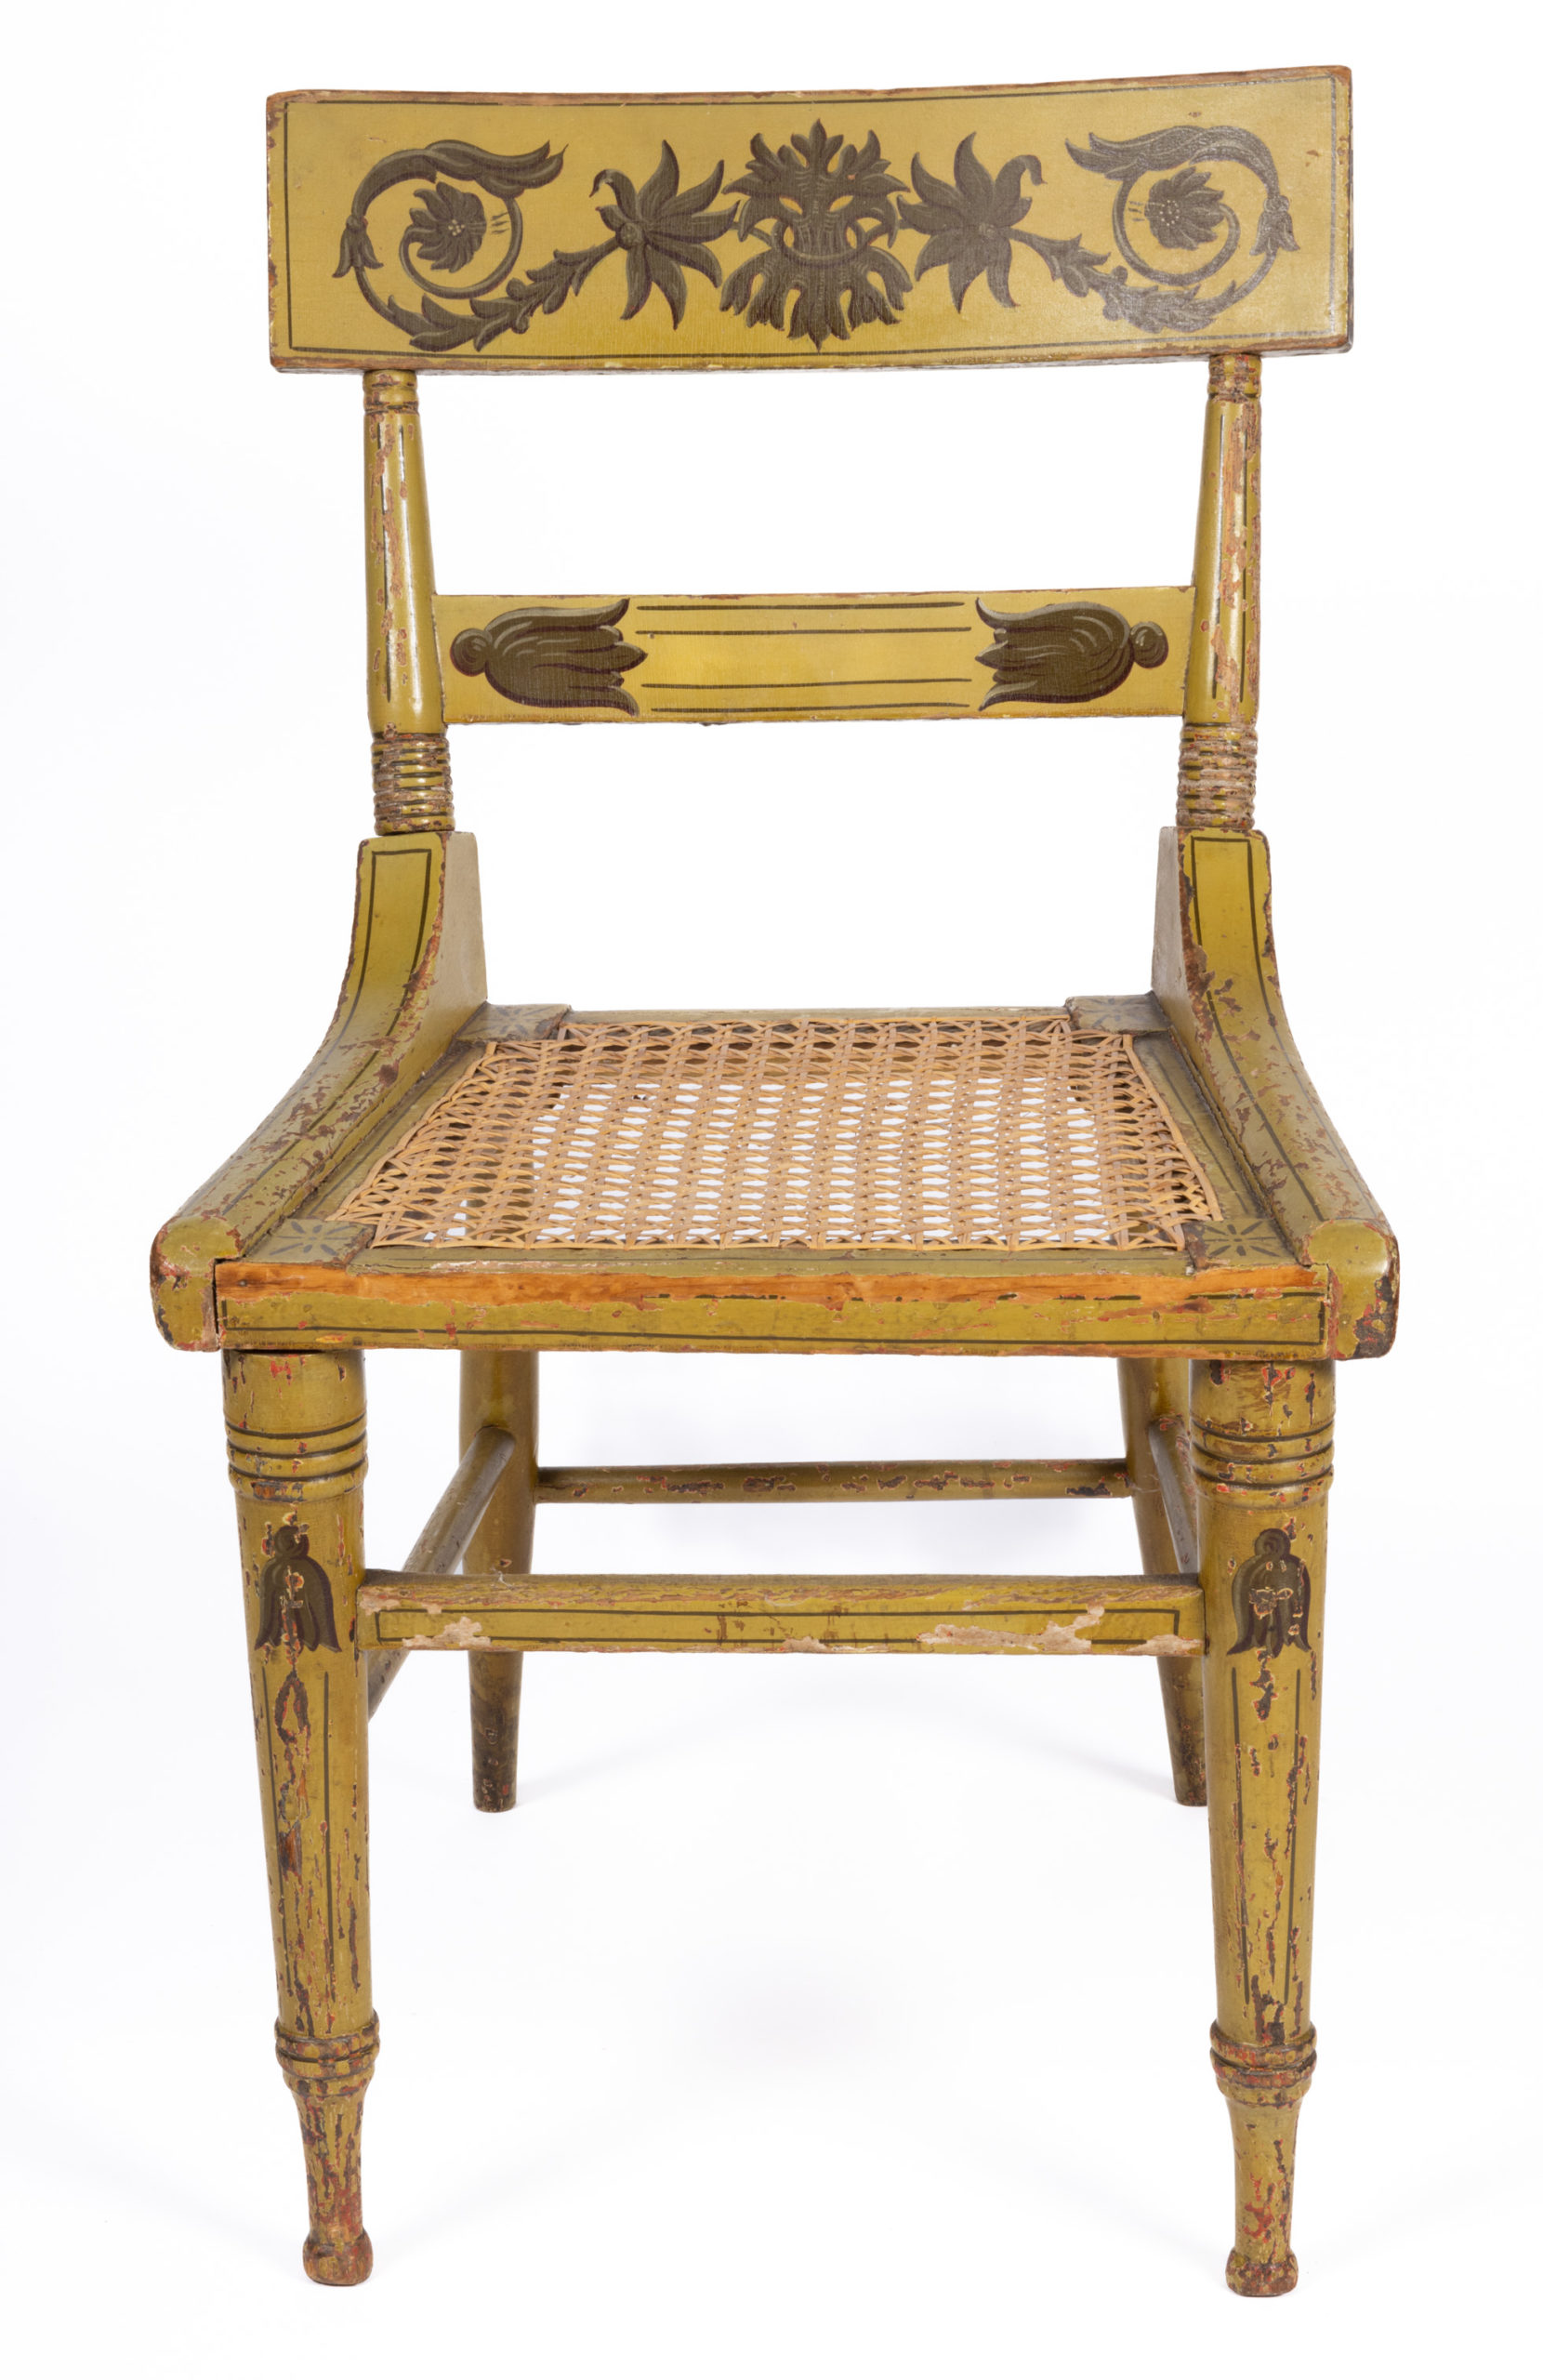 MID-ATLANTIC CLASSICAL PAINT-DECORATED FANCY SIDE CHAIR,